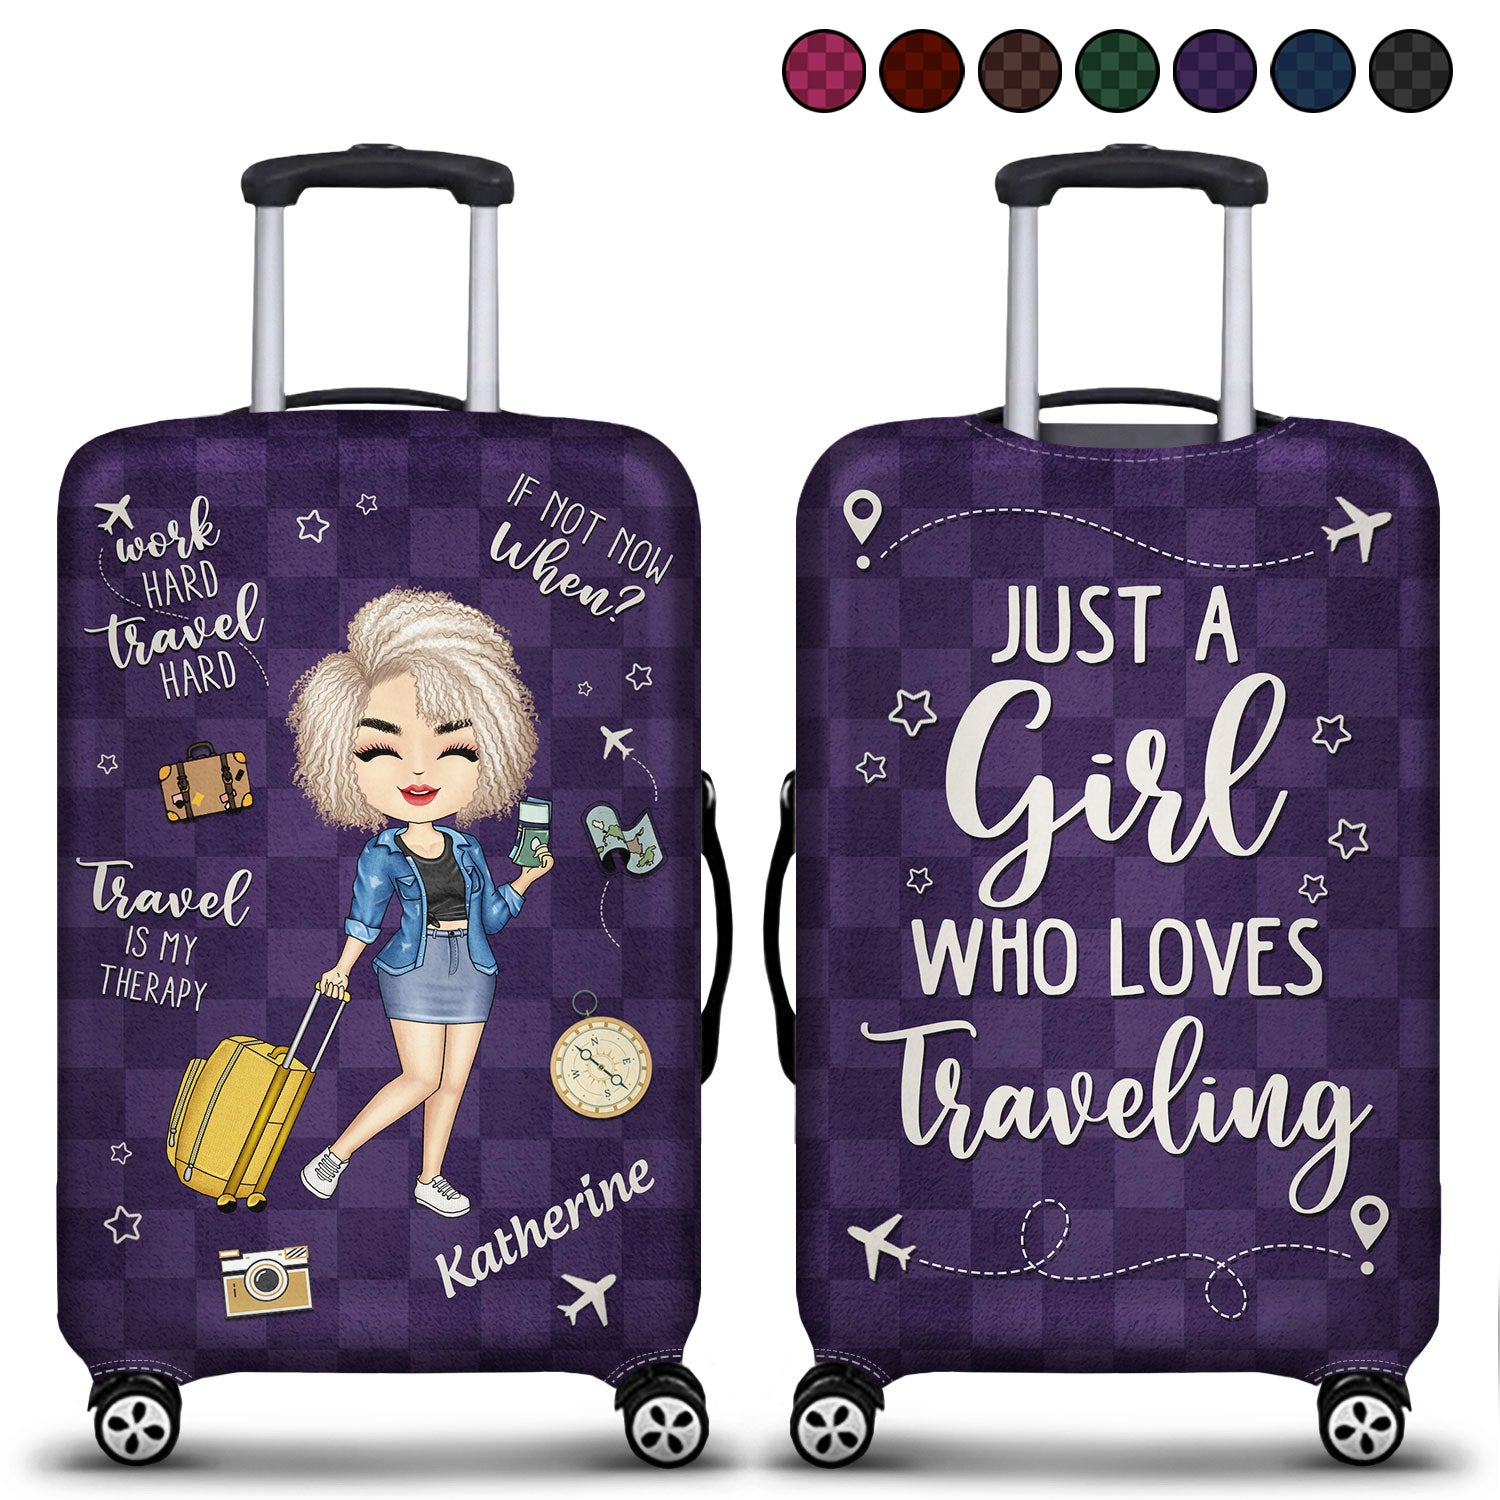 Travel Is My Therapy - Gift For Travellers, Travelling Lovers, Him, Her - Personalized Luggage Cover